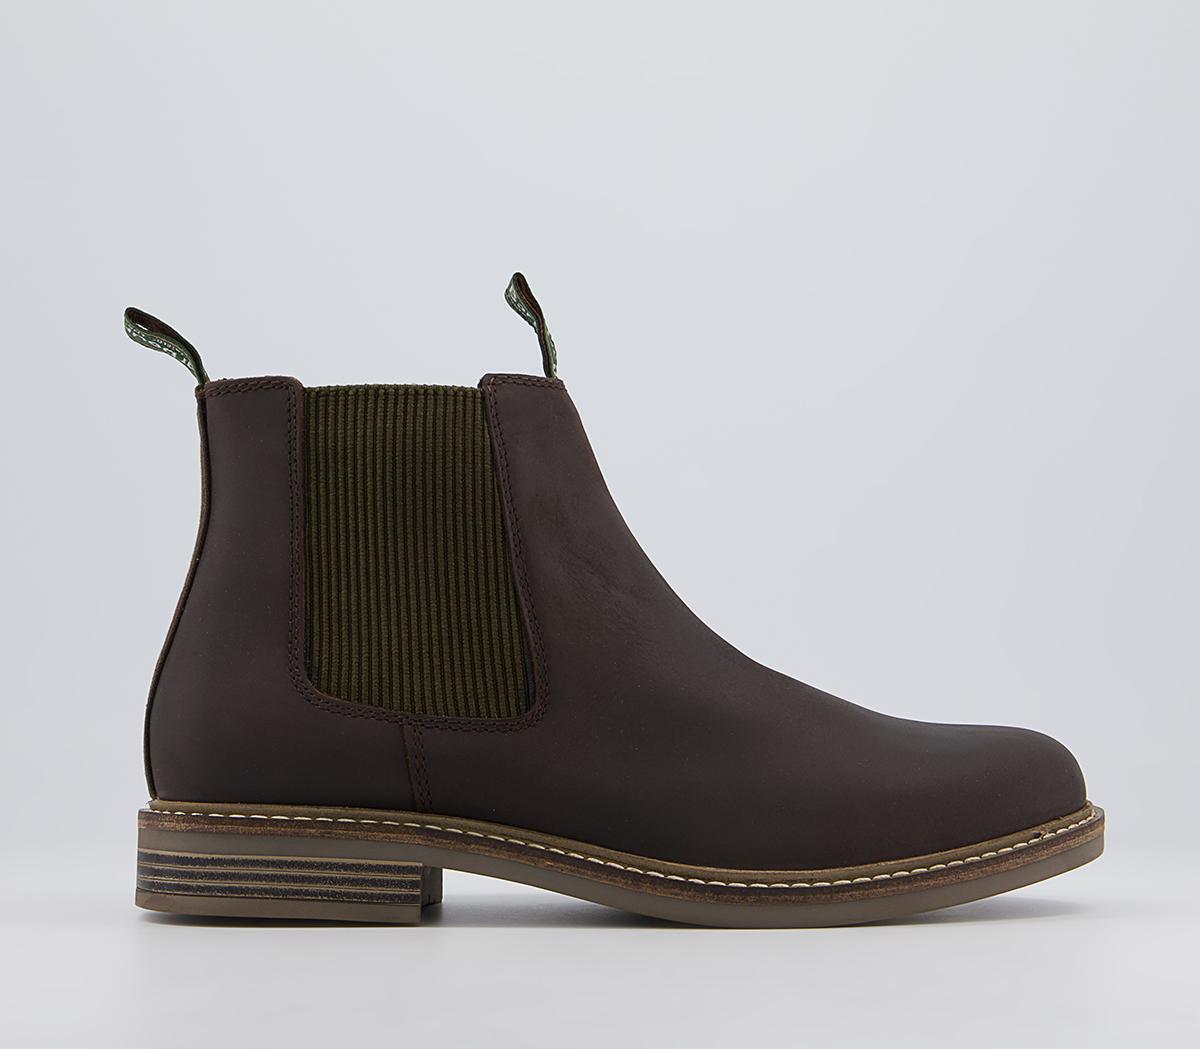 Barbour Farsley Chelsea Boots Chocolate Leather - Men’s Boots